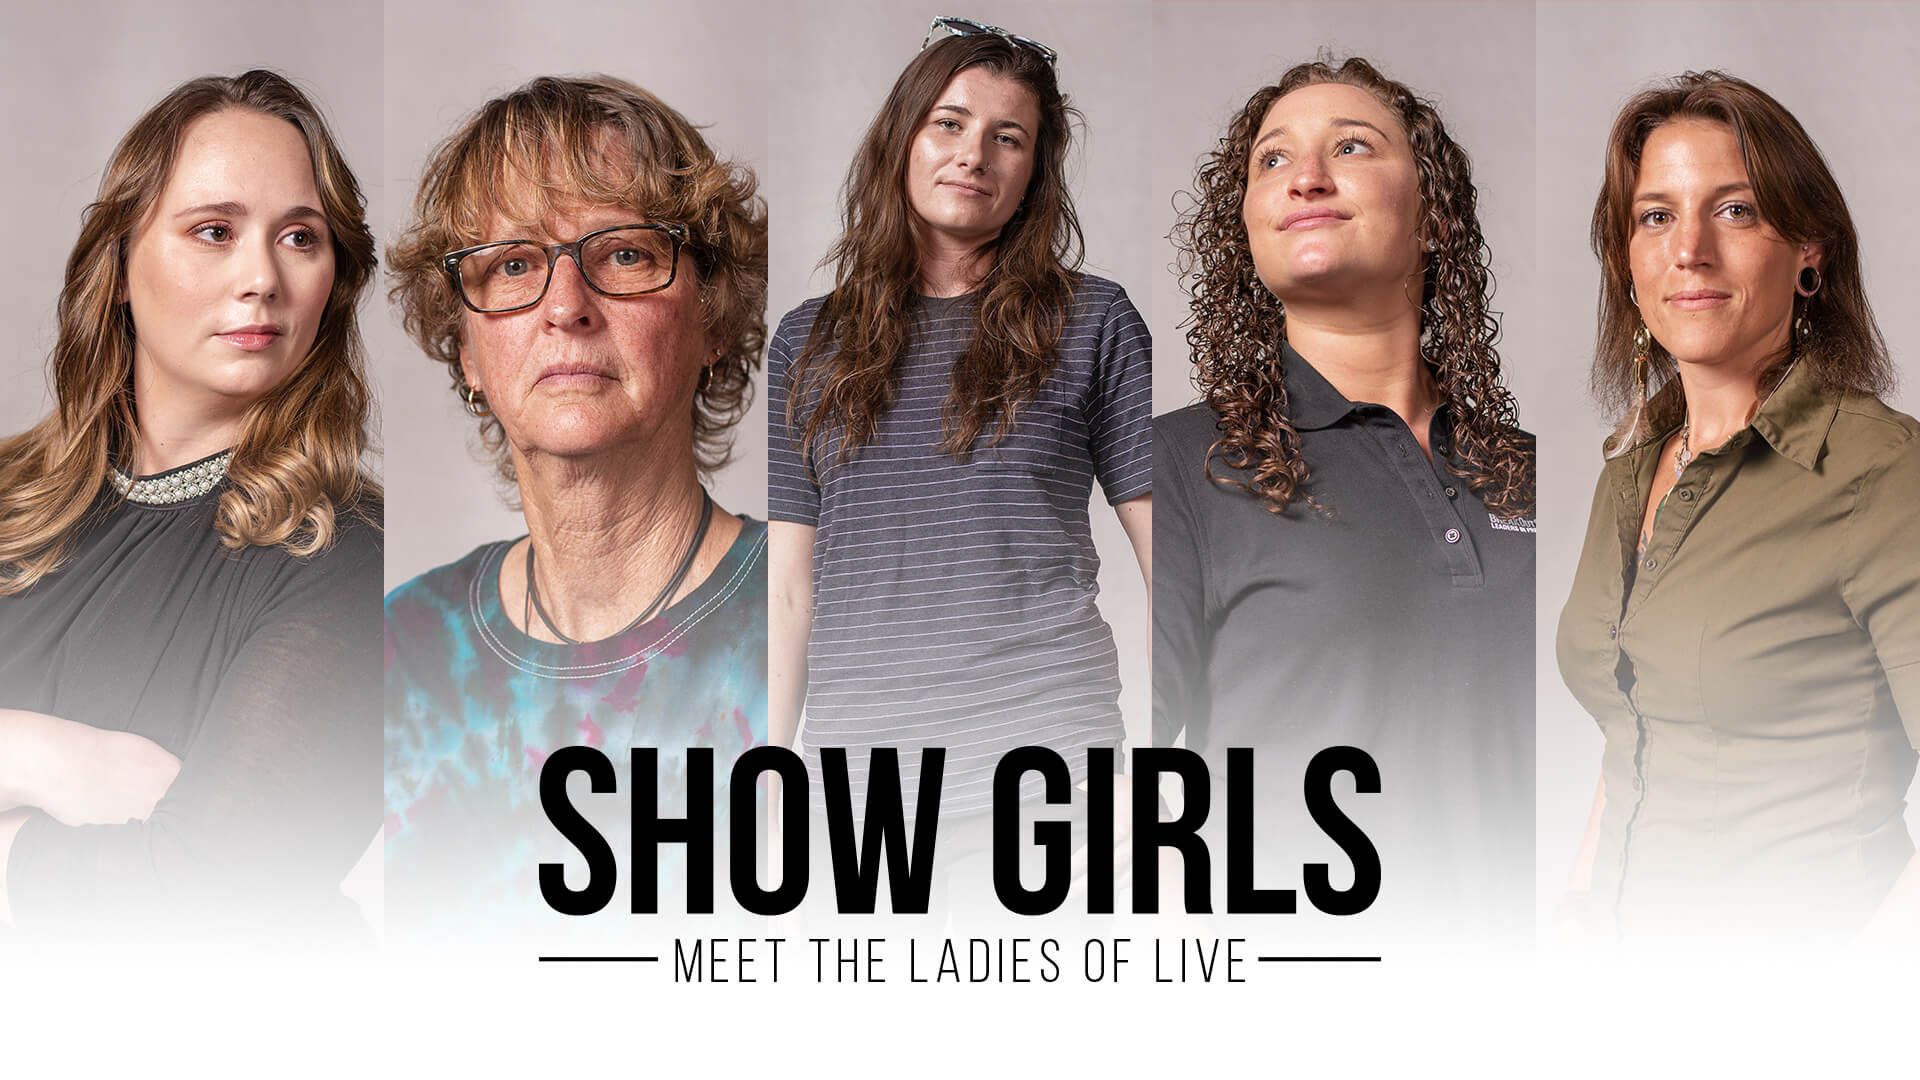 Show girls meet the ladies of live.